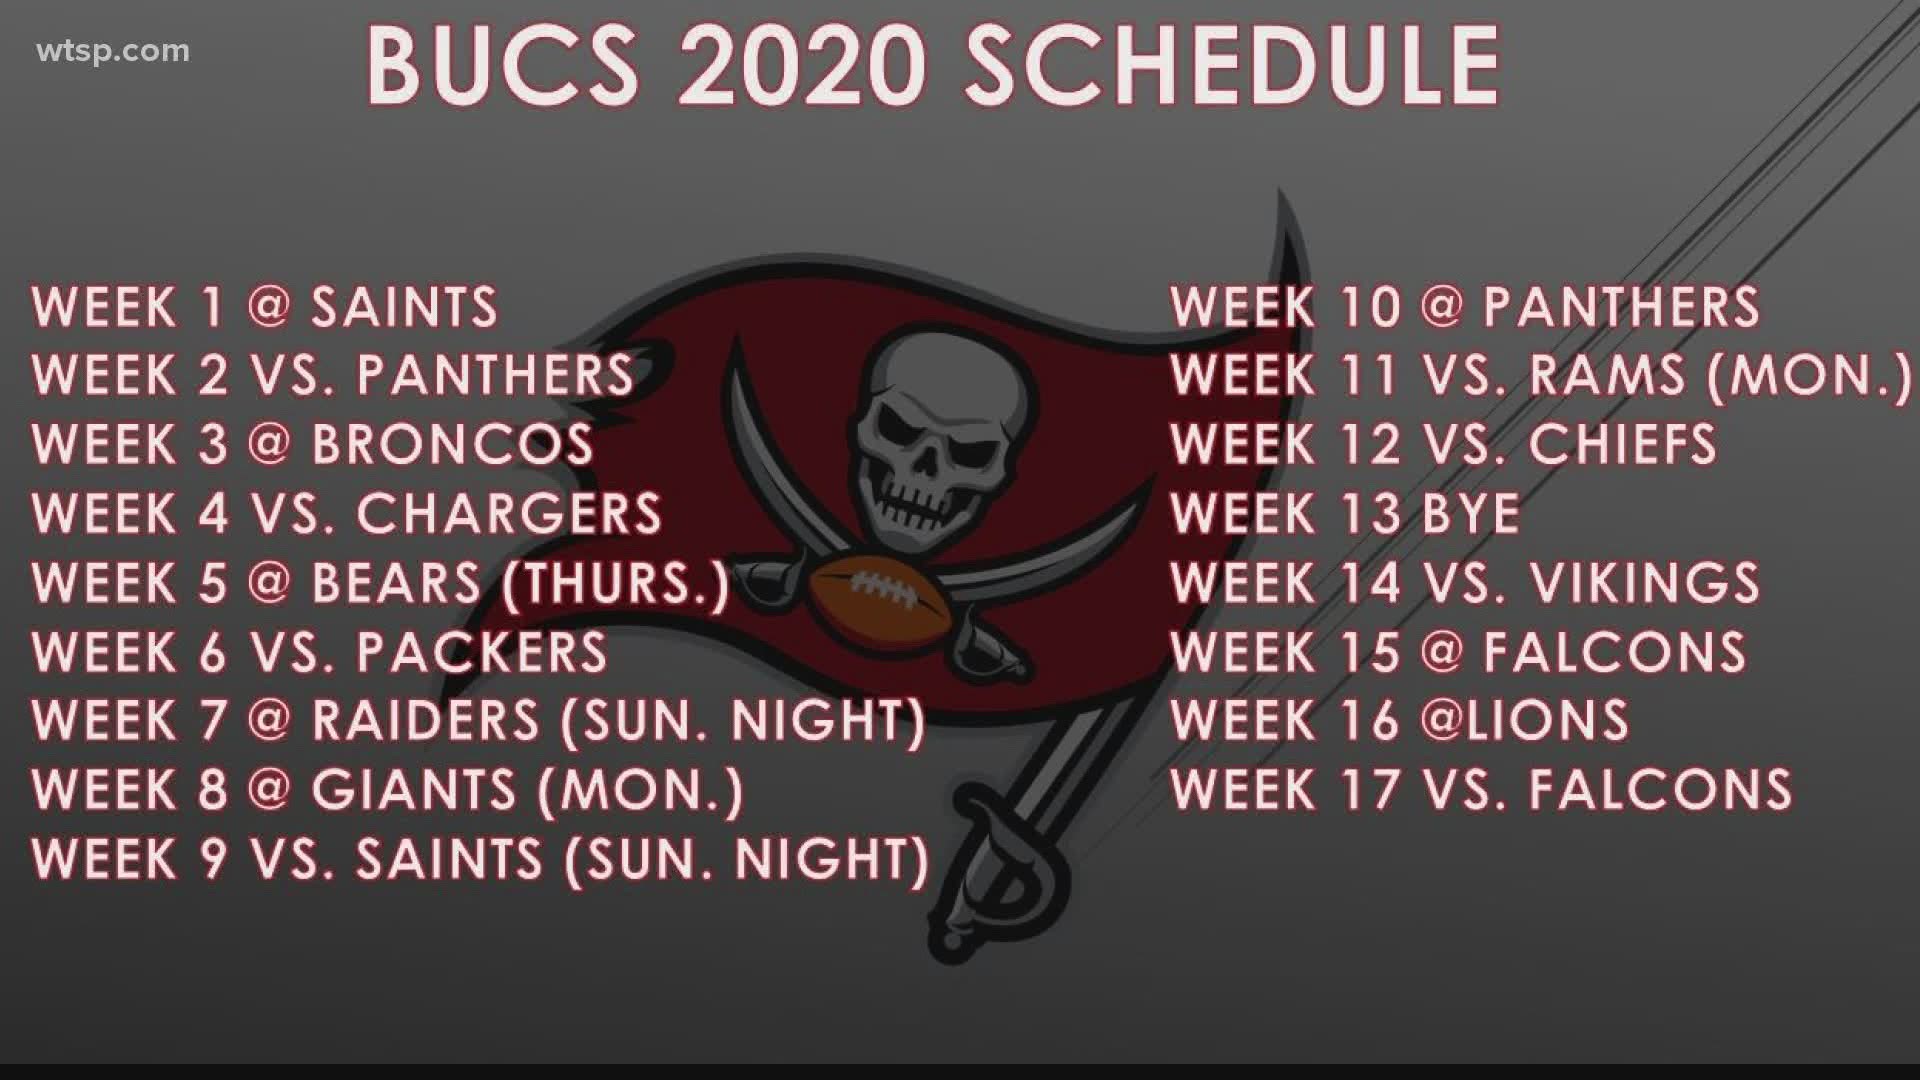 when is the bucs game tomorrow